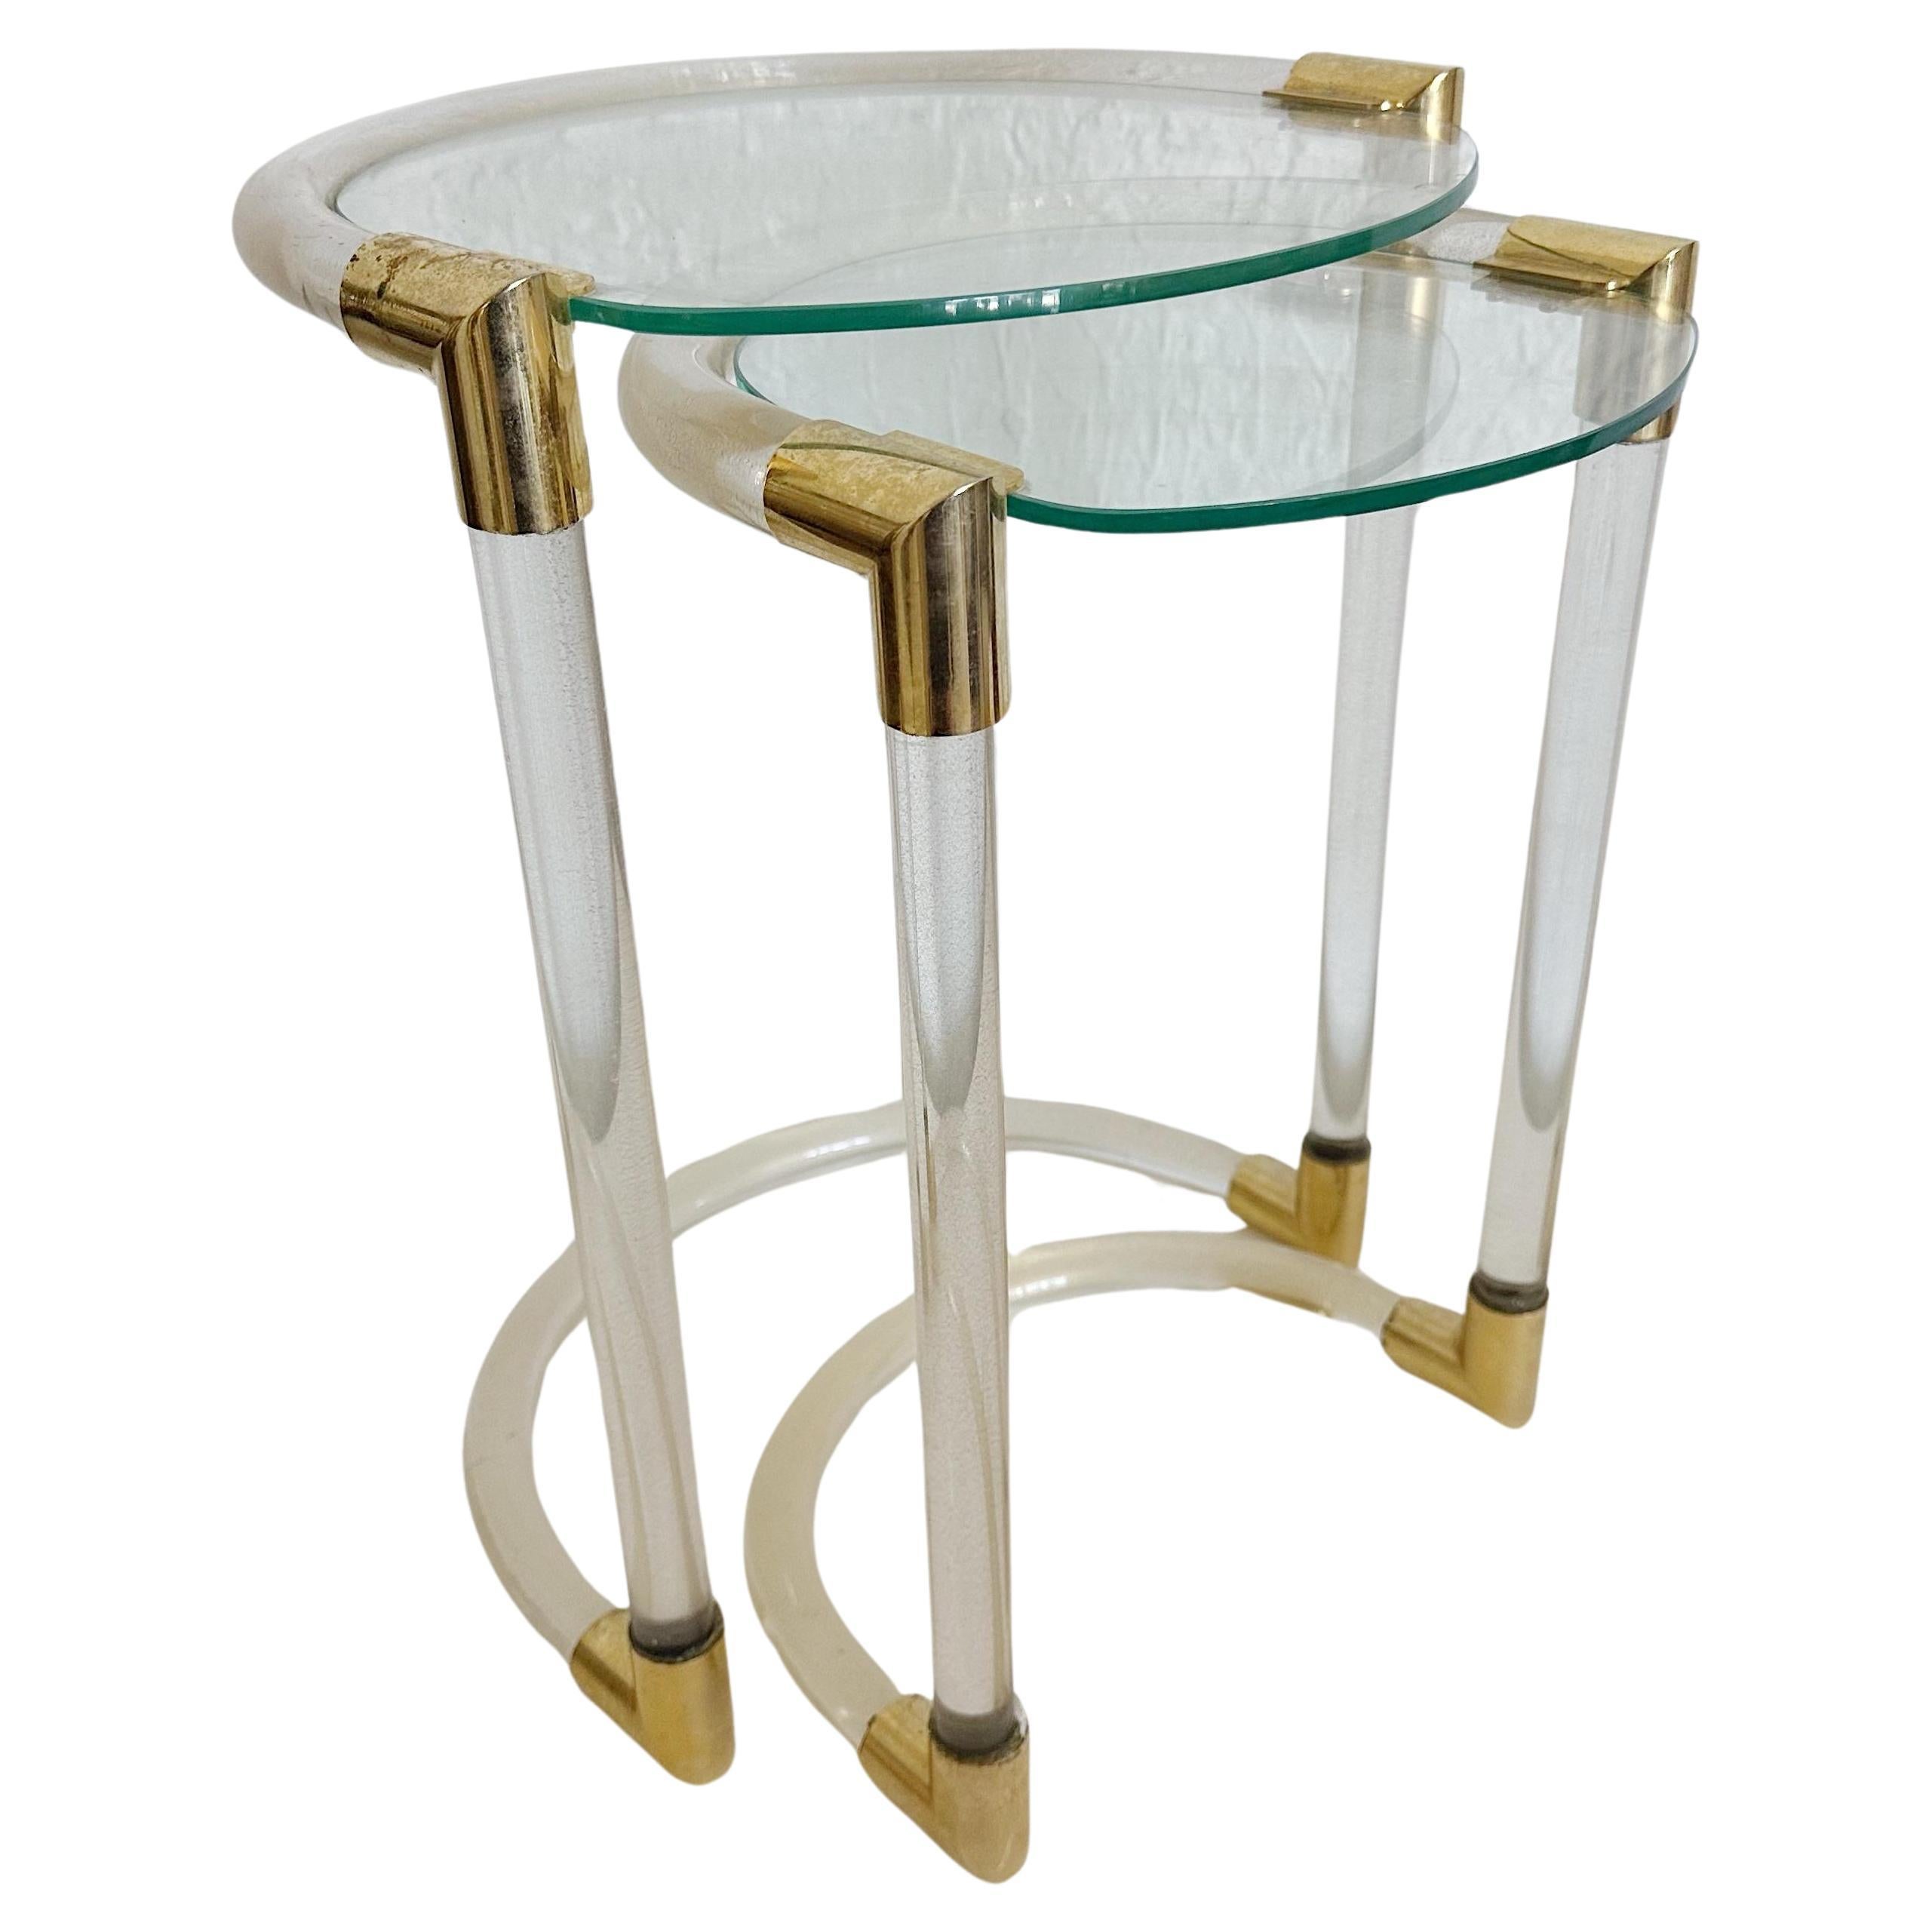 Set of 2 Archimede Seguso Brass and Glass Nesting Tables, Italy, 1950s